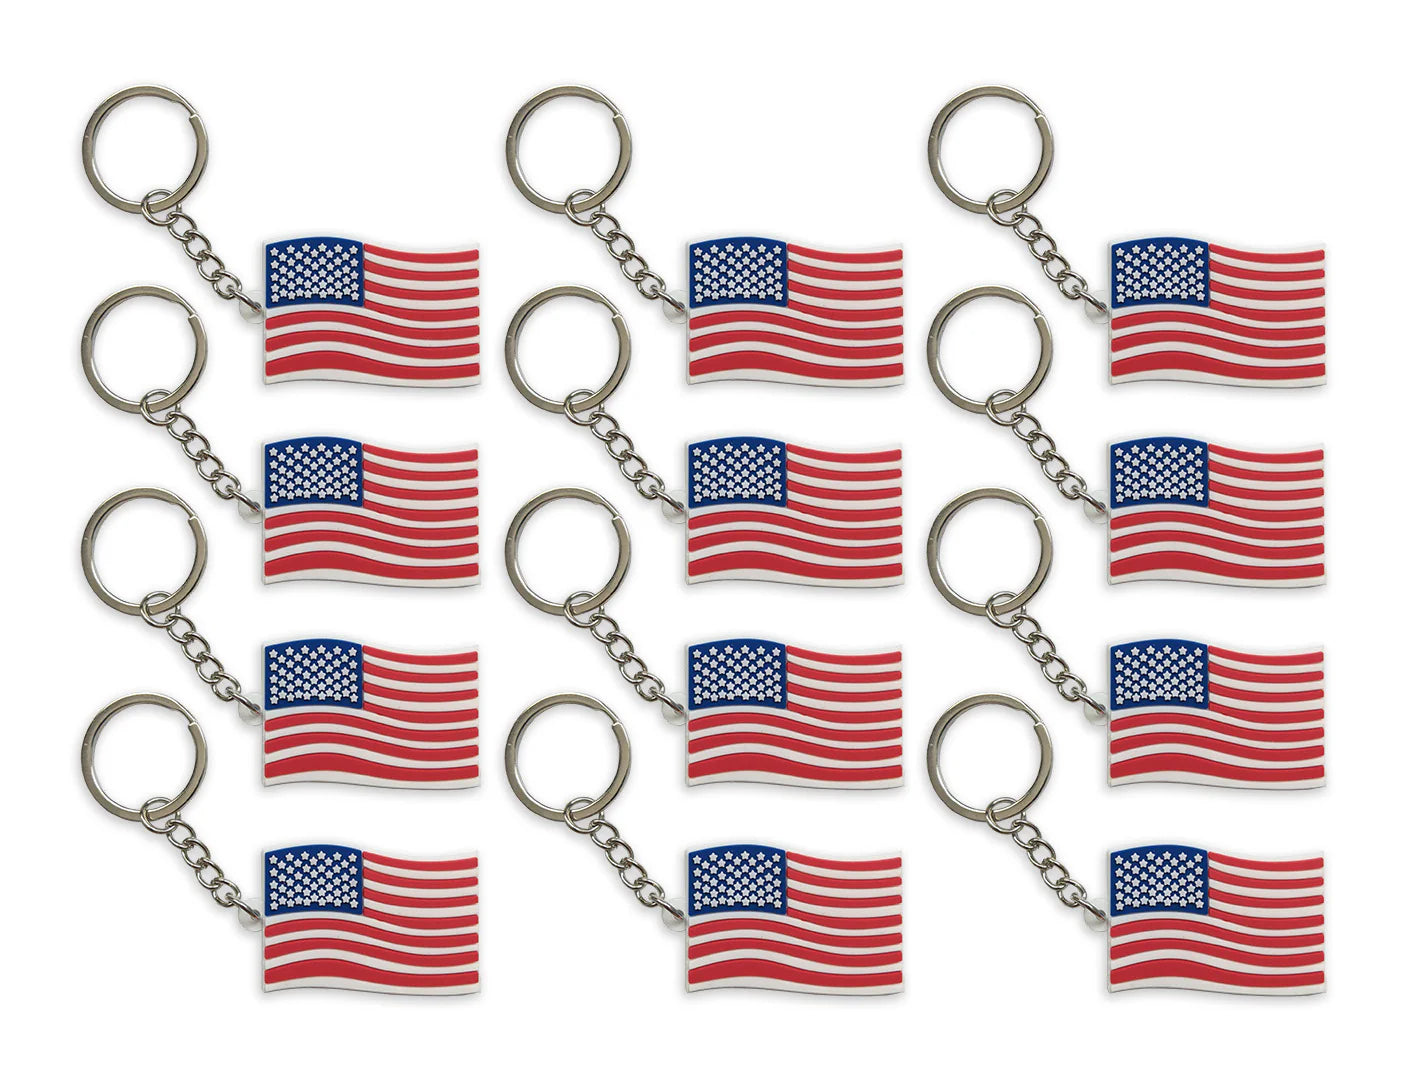 ITEM NUMBER KP4376 AMERICAN FLAG SOFT RUBBER KEYCHAINS  12 PIECES PER BAG